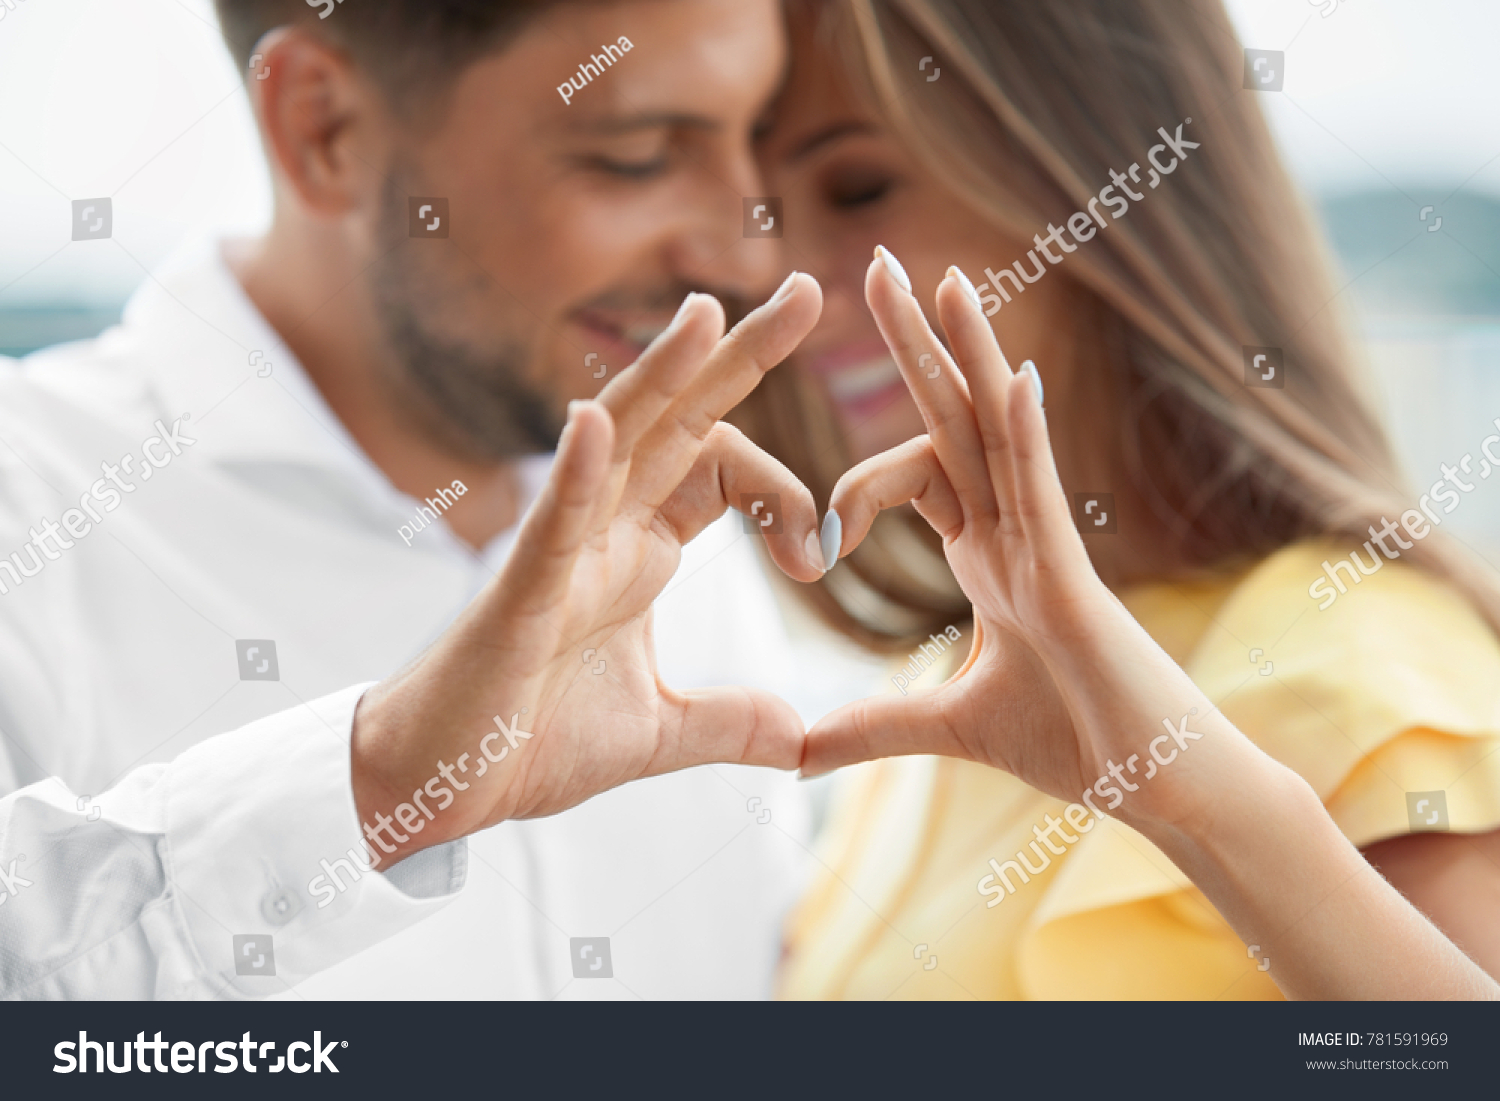 Beautiful Couple In Love Making Heart With Hands. Happy Smiling Young People Hugging, Showing Heart Shape With Hands And Enjoying Each Other Outdoors. Romantic Relationships. High Quality Image. #781591969